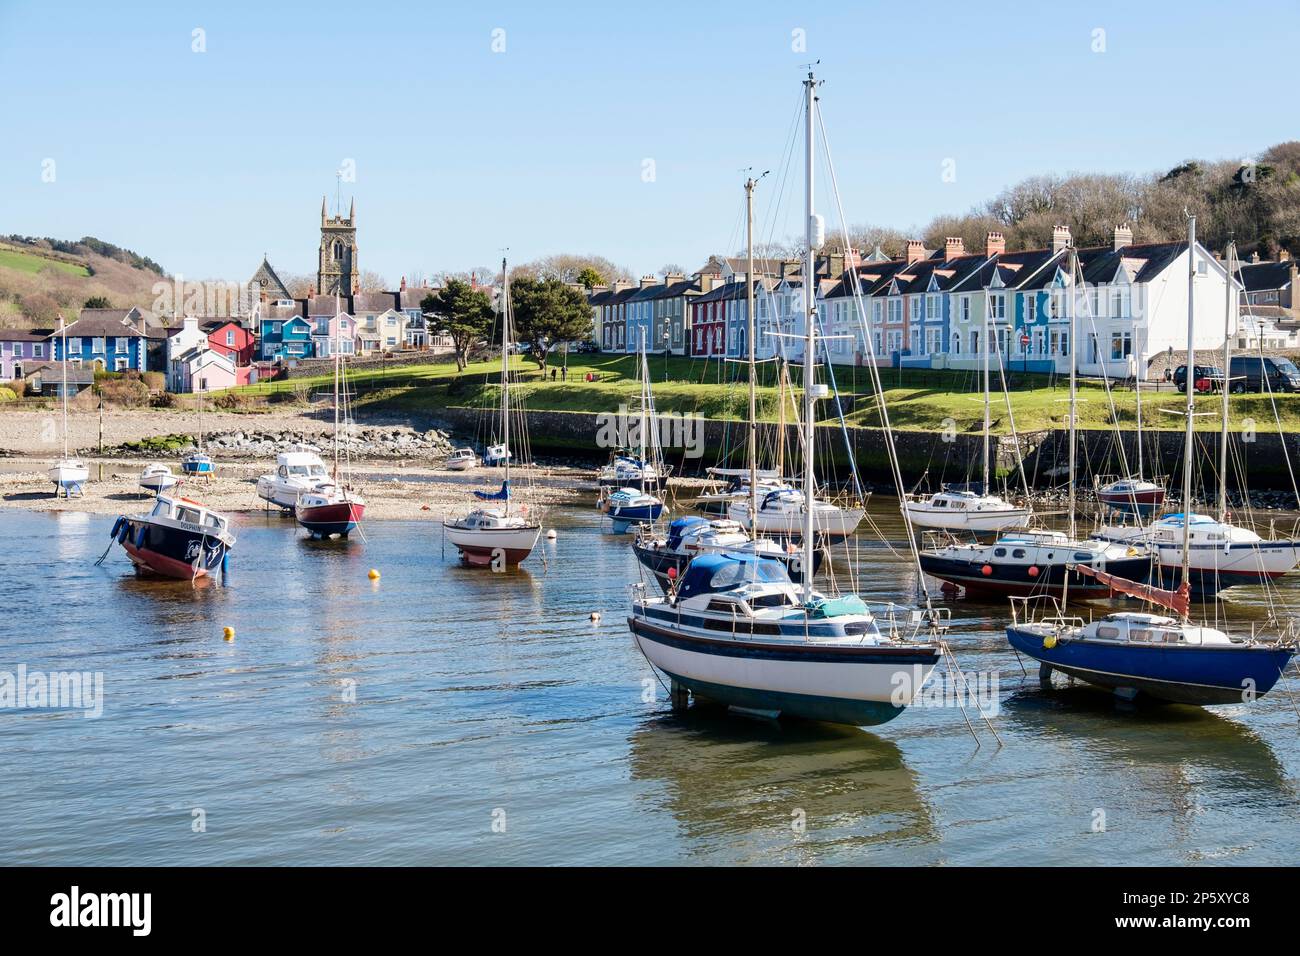 View along Afon Aeron River estuary to church with boats moored in harbour on an incoming tide in attractive seaside town. Aberaeron Ceredigion Wales Stock Photo